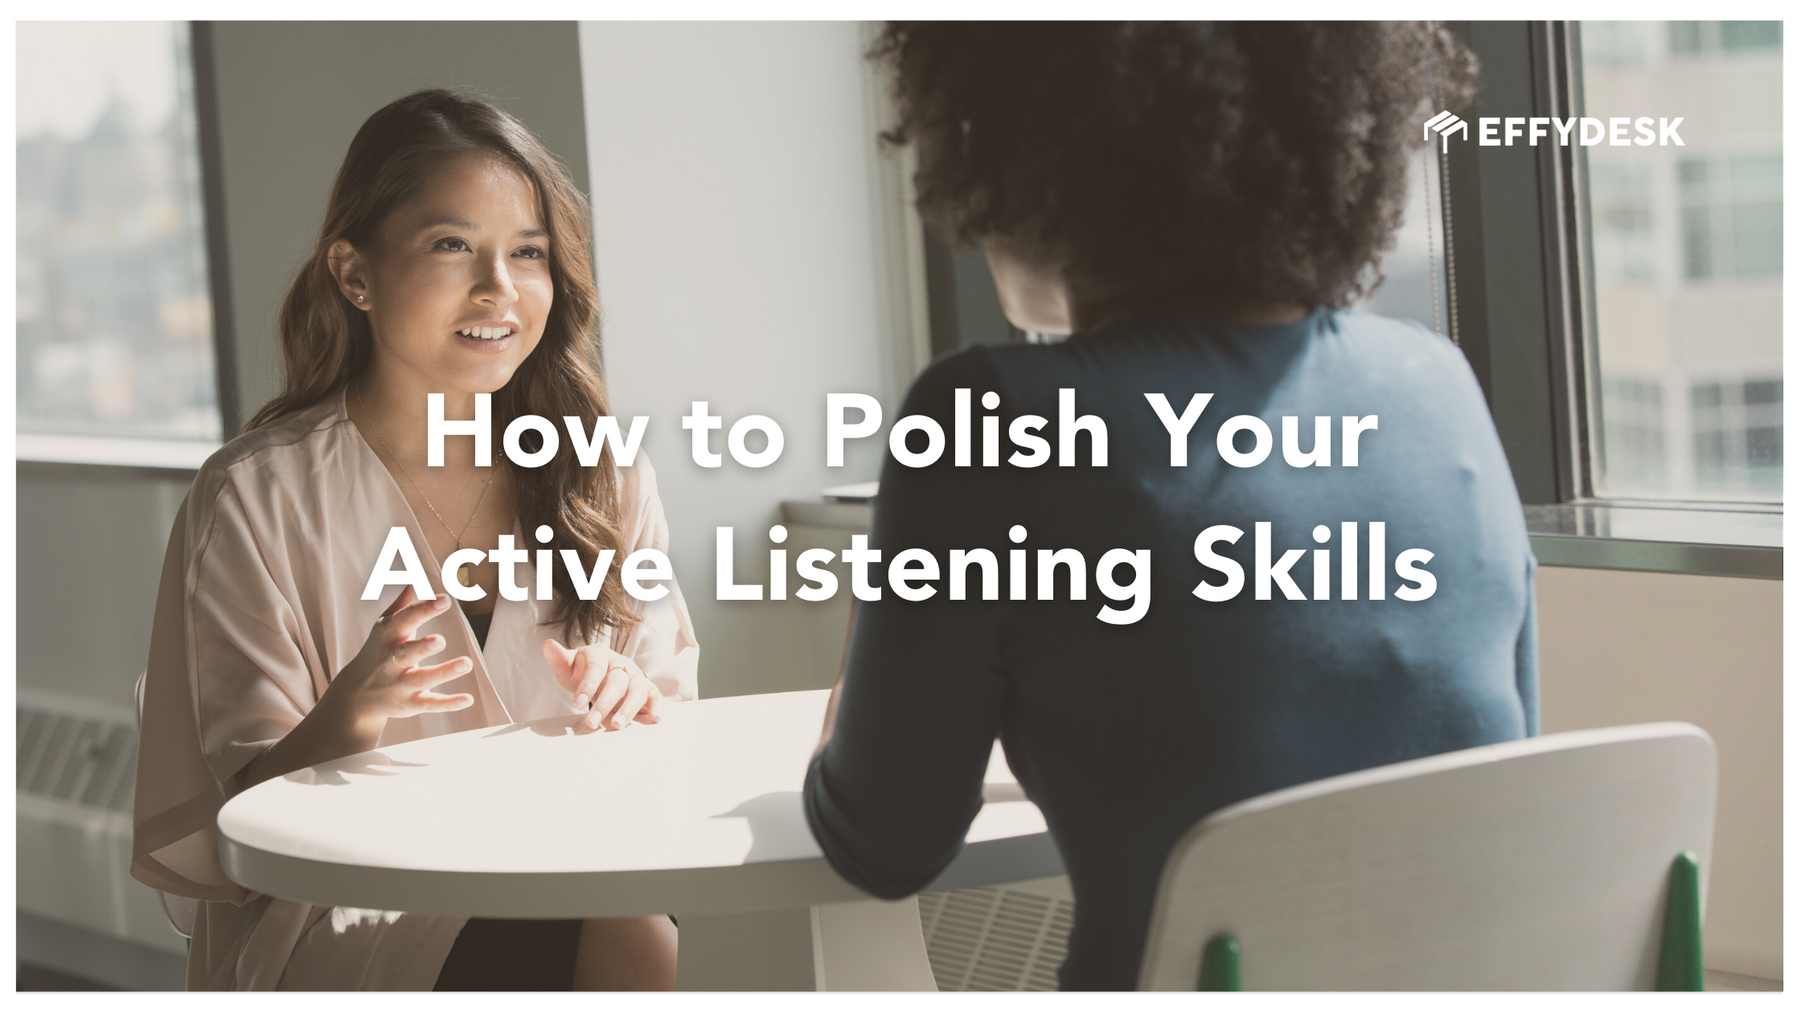 Learn how to become a active listener with these five tips